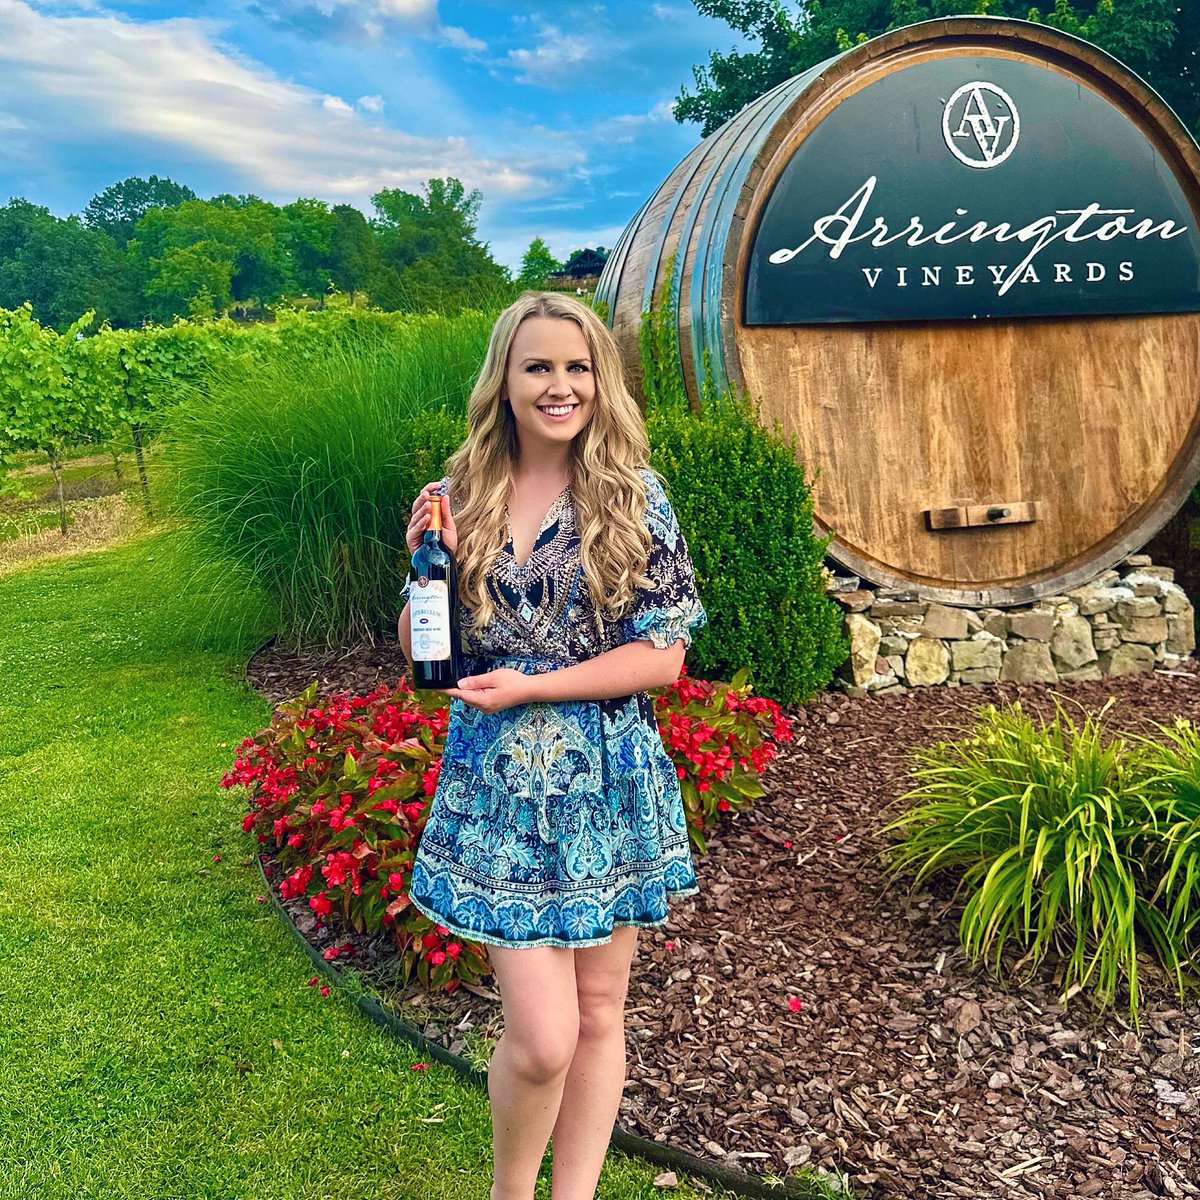 Cheers to the weekend 🥂
@avwinery 
#Nashville #Tipsy #WeekendFun